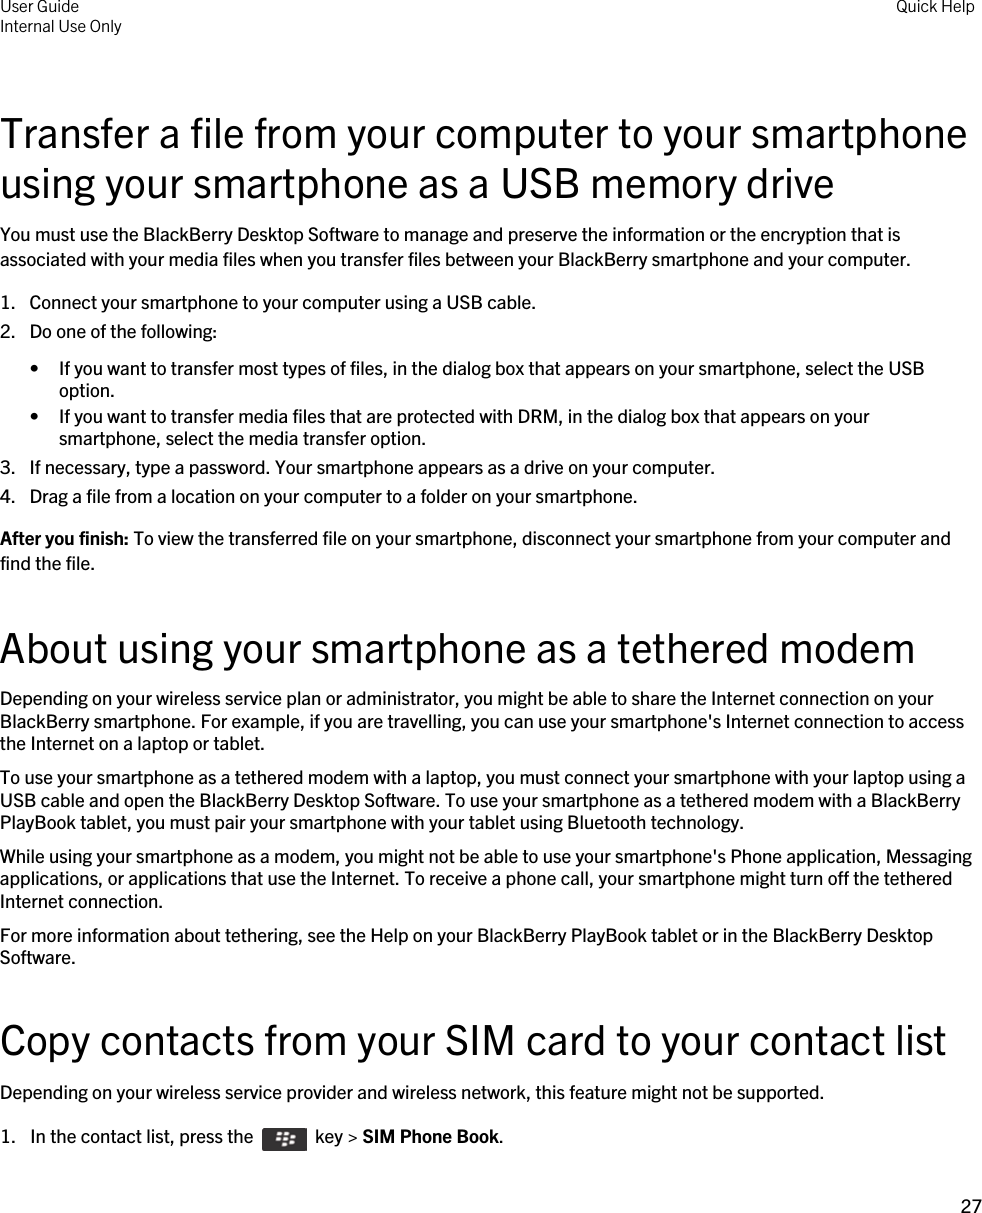 Transfer a file from your computer to your smartphone using your smartphone as a USB memory driveYou must use the BlackBerry Desktop Software to manage and preserve the information or the encryption that is associated with your media files when you transfer files between your BlackBerry smartphone and your computer.1. Connect your smartphone to your computer using a USB cable.2. Do one of the following:• If you want to transfer most types of files, in the dialog box that appears on your smartphone, select the USB option.• If you want to transfer media files that are protected with DRM, in the dialog box that appears on your smartphone, select the media transfer option.3. If necessary, type a password. Your smartphone appears as a drive on your computer.4. Drag a file from a location on your computer to a folder on your smartphone.After you finish: To view the transferred file on your smartphone, disconnect your smartphone from your computer and find the file.About using your smartphone as a tethered modemDepending on your wireless service plan or administrator, you might be able to share the Internet connection on your BlackBerry smartphone. For example, if you are travelling, you can use your smartphone&apos;s Internet connection to access the Internet on a laptop or tablet.To use your smartphone as a tethered modem with a laptop, you must connect your smartphone with your laptop using a USB cable and open the BlackBerry Desktop Software. To use your smartphone as a tethered modem with a BlackBerry PlayBook tablet, you must pair your smartphone with your tablet using Bluetooth technology.While using your smartphone as a modem, you might not be able to use your smartphone&apos;s Phone application, Messaging applications, or applications that use the Internet. To receive a phone call, your smartphone might turn off the tethered Internet connection.For more information about tethering, see the Help on your BlackBerry PlayBook tablet or in the BlackBerry Desktop Software.Copy contacts from your SIM card to your contact listDepending on your wireless service provider and wireless network, this feature might not be supported.1.  In the contact list, press the    key &gt; SIM Phone Book. User GuideInternal Use Only Quick Help27 